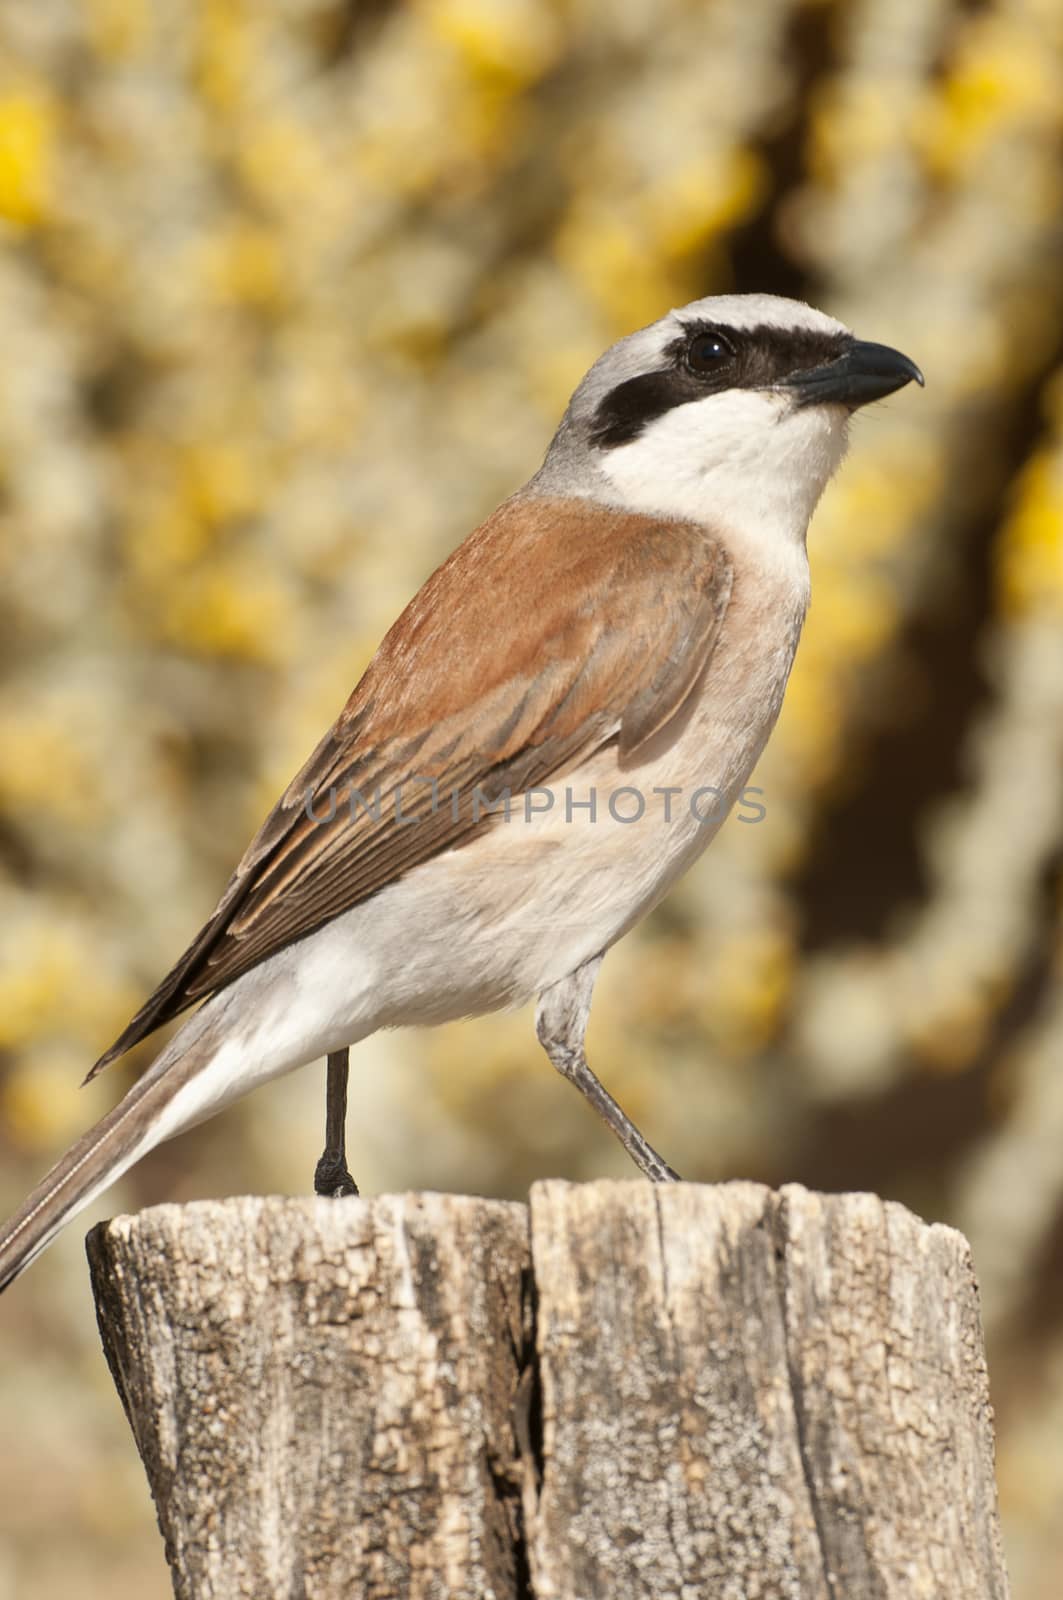 Red-backed shrike male. Lanius collurio, with yellow background on a trunk